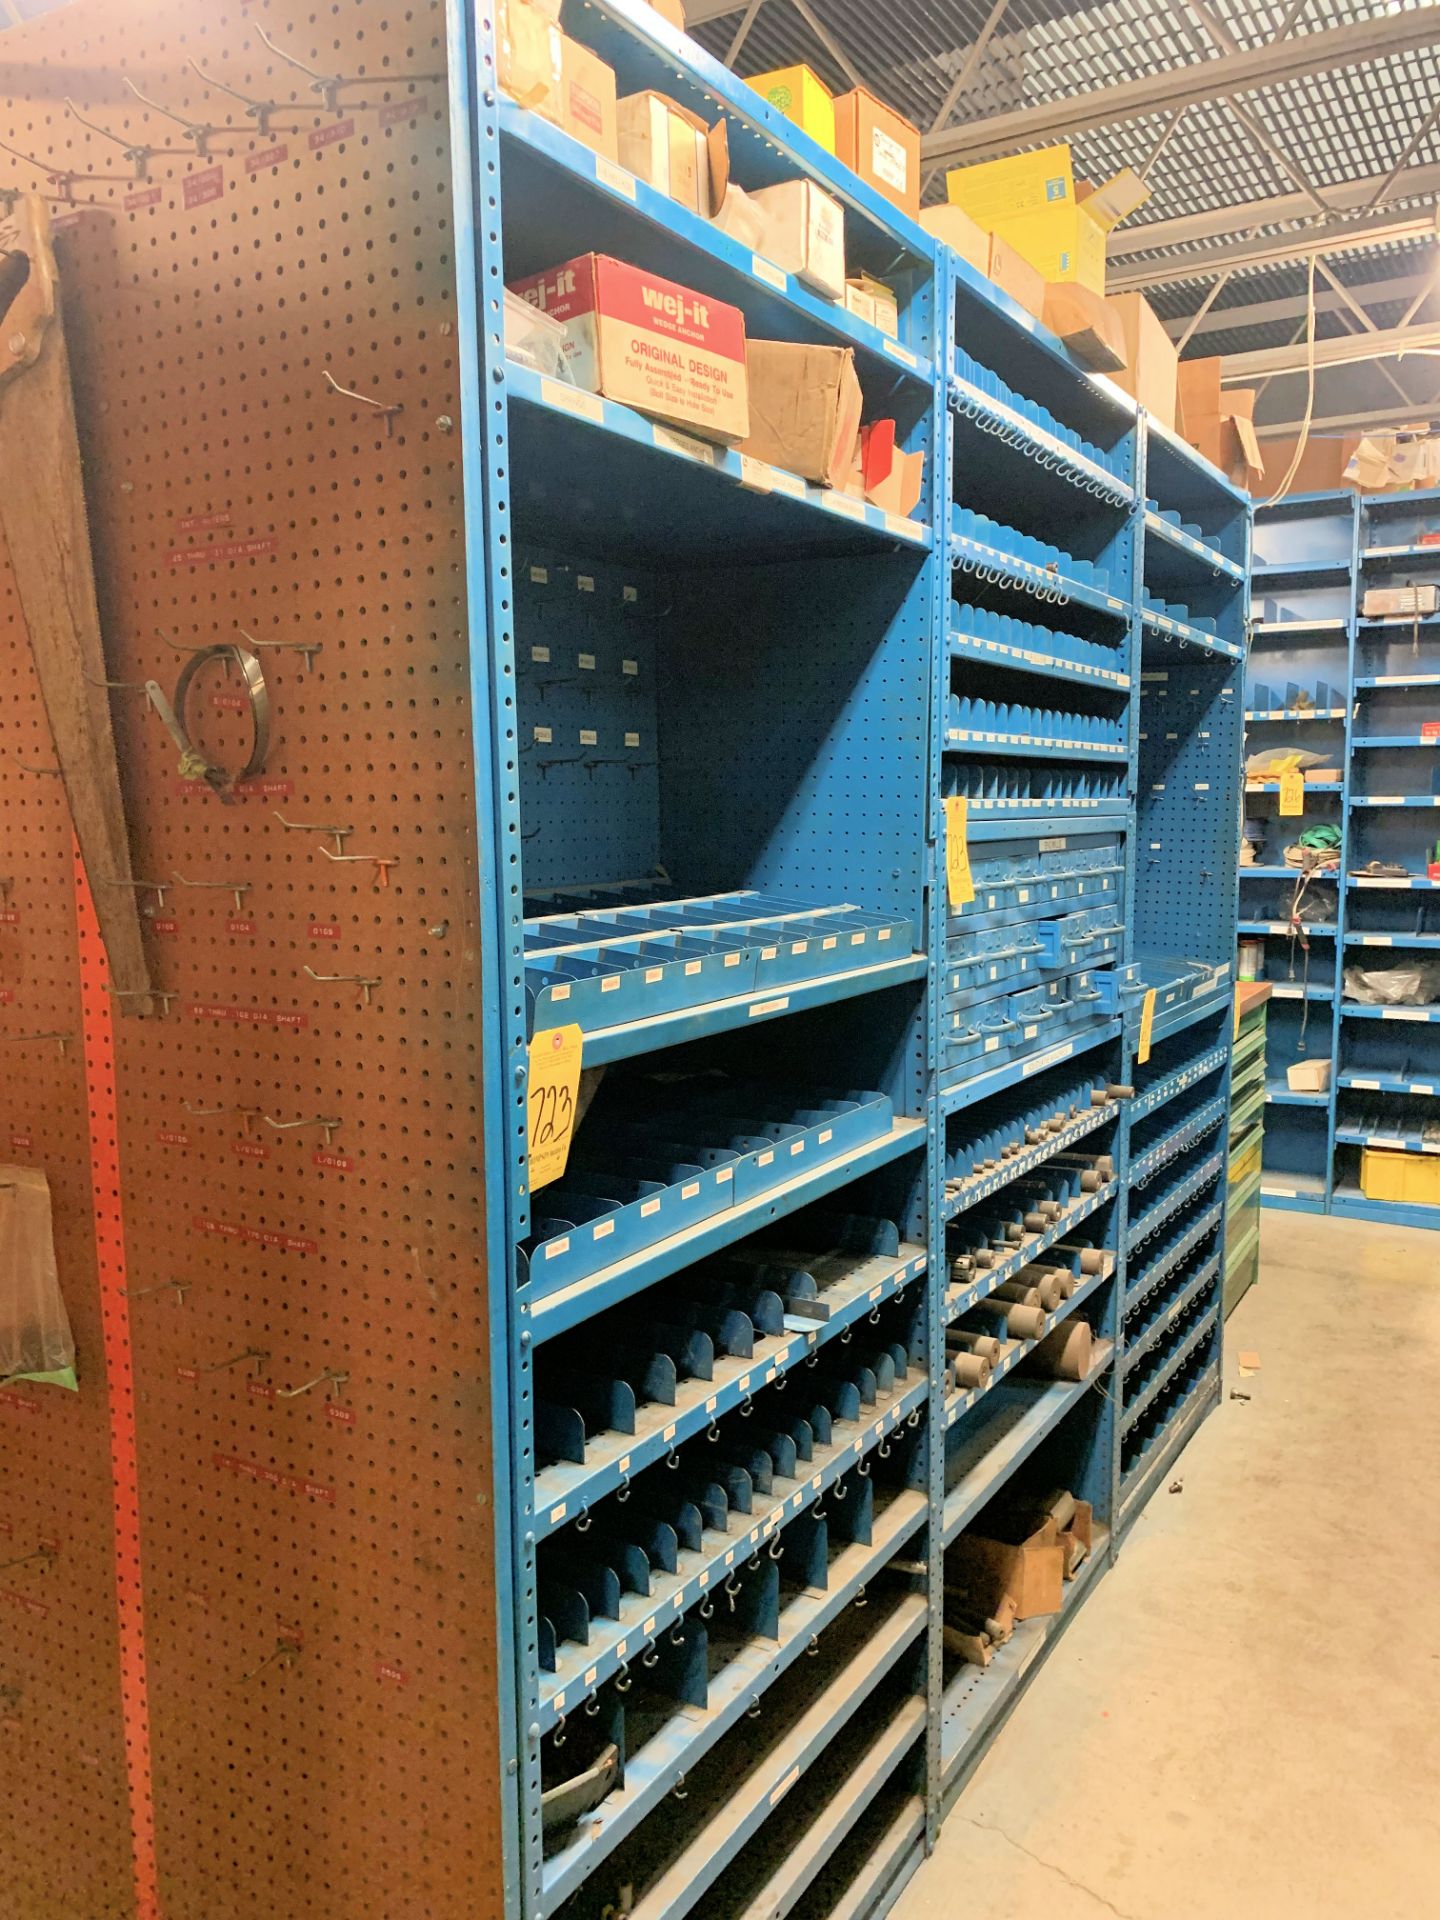 Lot-(5) Sections Shelving/Bin Organizer Cabinets with Collets, Anchors, Holders, Lubricants, Drills,